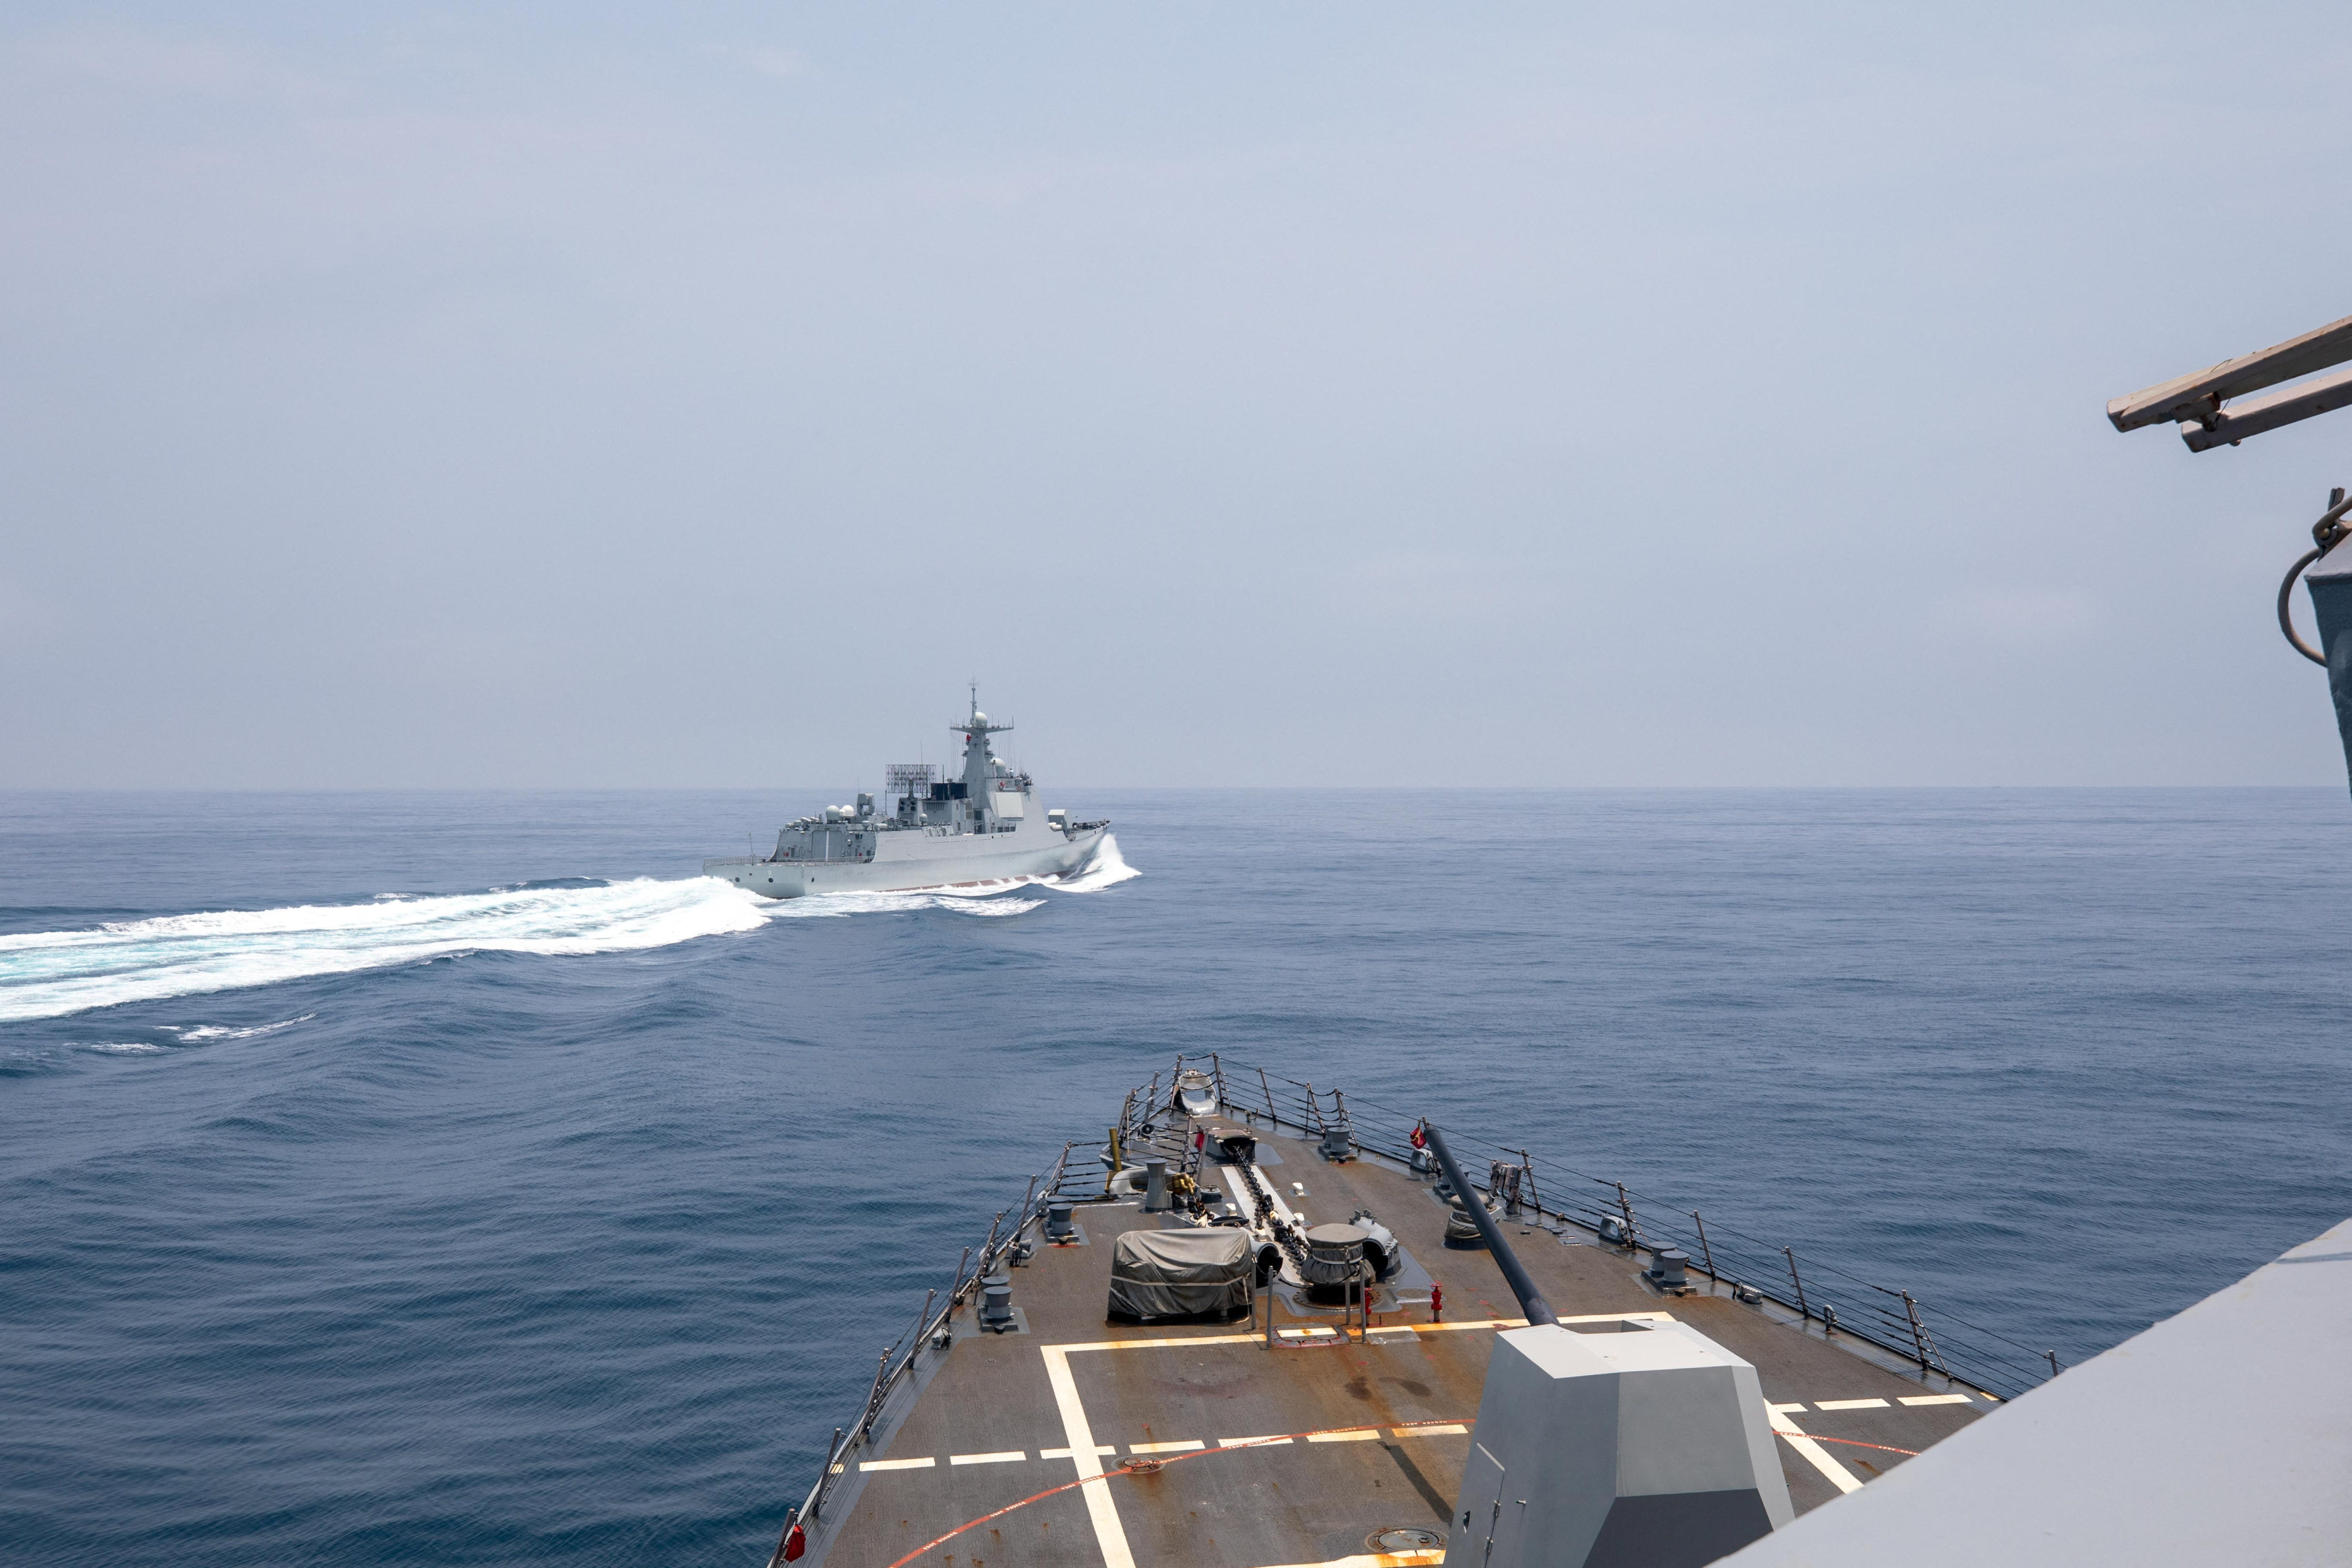 The Chinese warship Luyang III sails near the USS Chung-Hoon, as seen from the deck of a US destroyer in the Taiwan Strait on June 3. A Pentagon official has discussed a plan to increase use of drones and other “attritable autonomous systems” in countering China. Photo: US Navy via Reuters